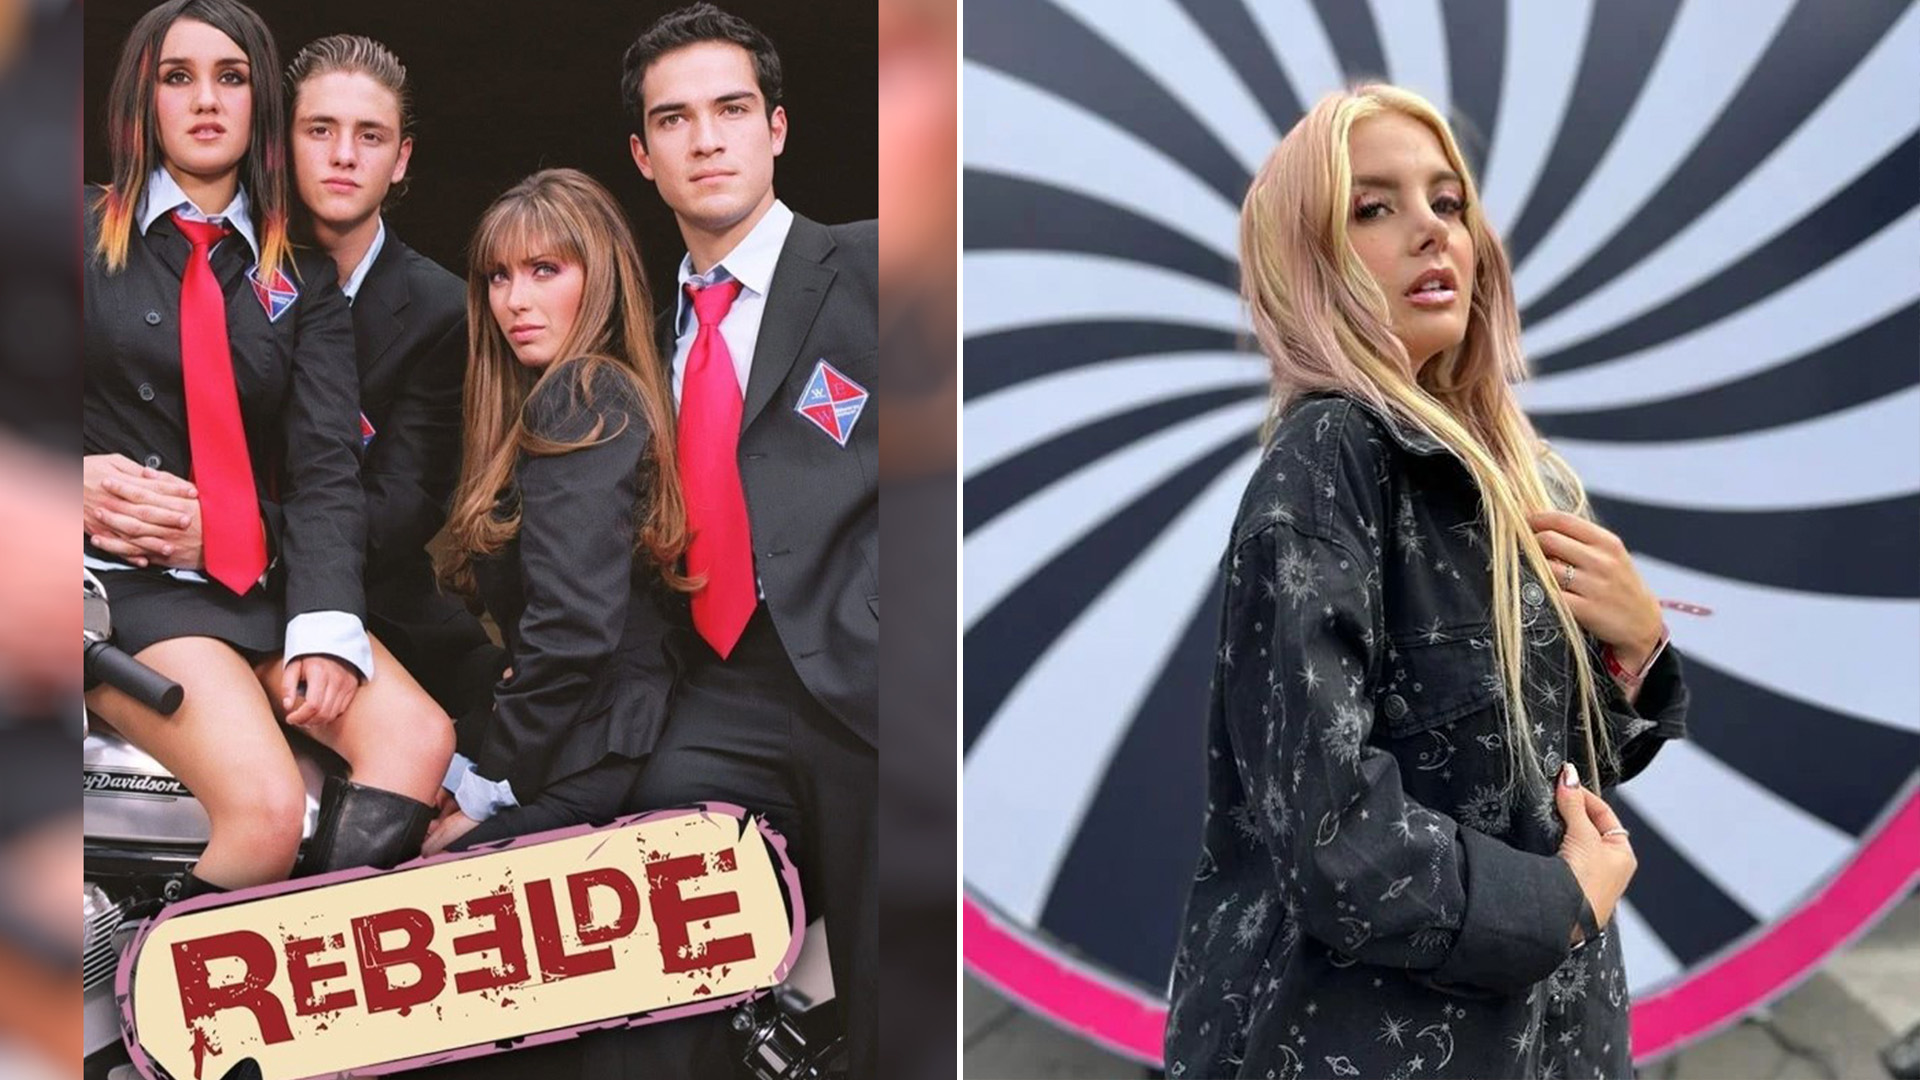 Mafer Bad or "fuzz" He joined Rebelde some time after the start of the story (Photo: Televisa / Instragram/@fuzzoficial)